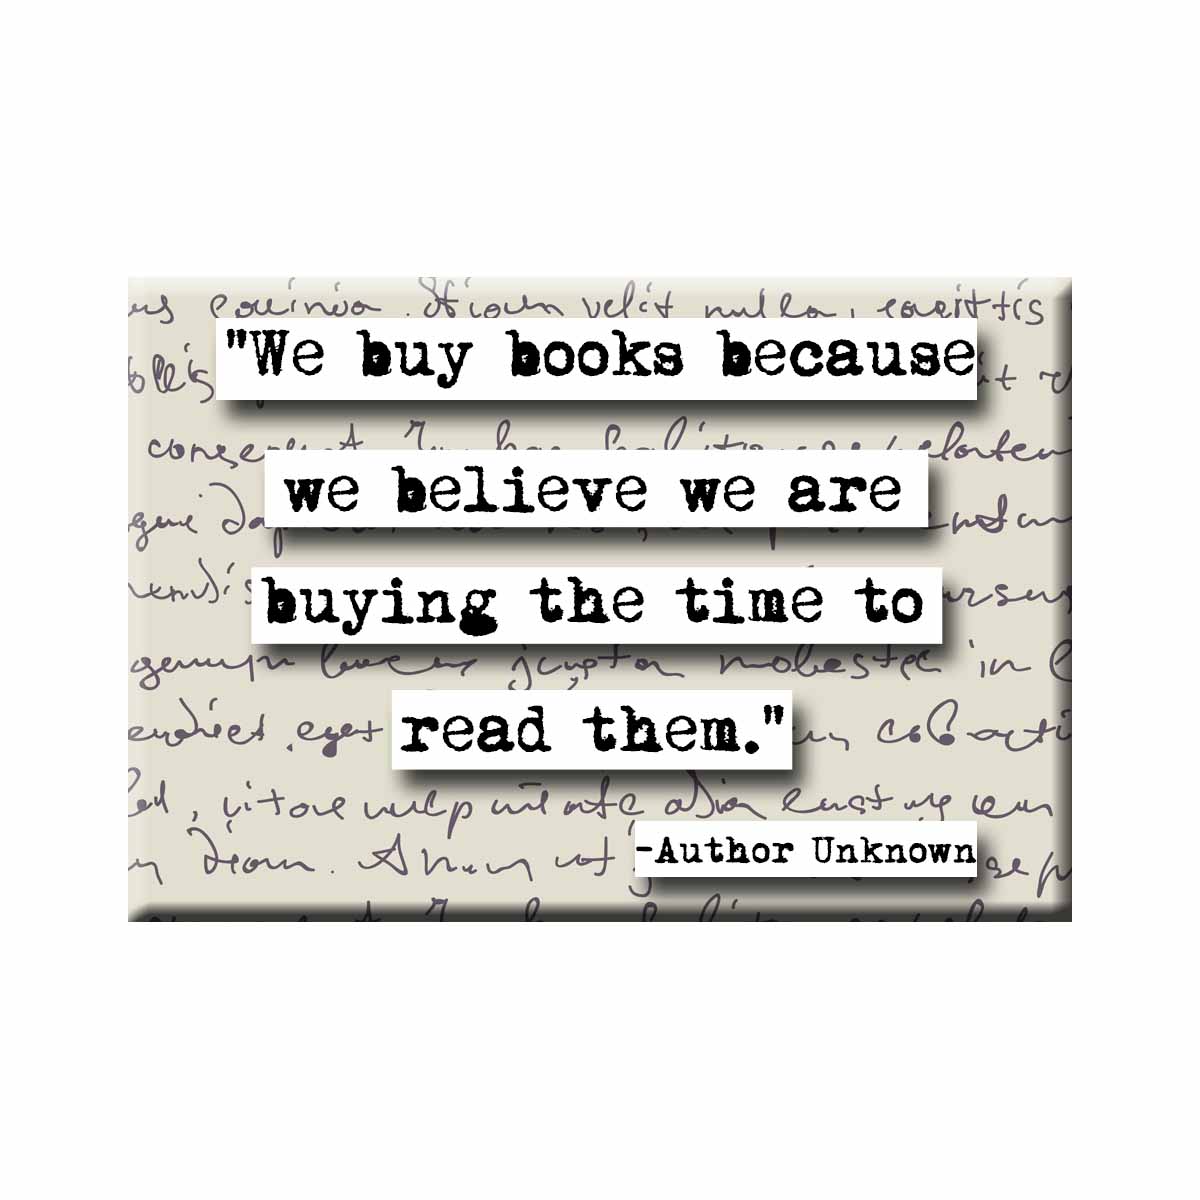 We Buy Books Refrigerator Quote Magnet (no.179)